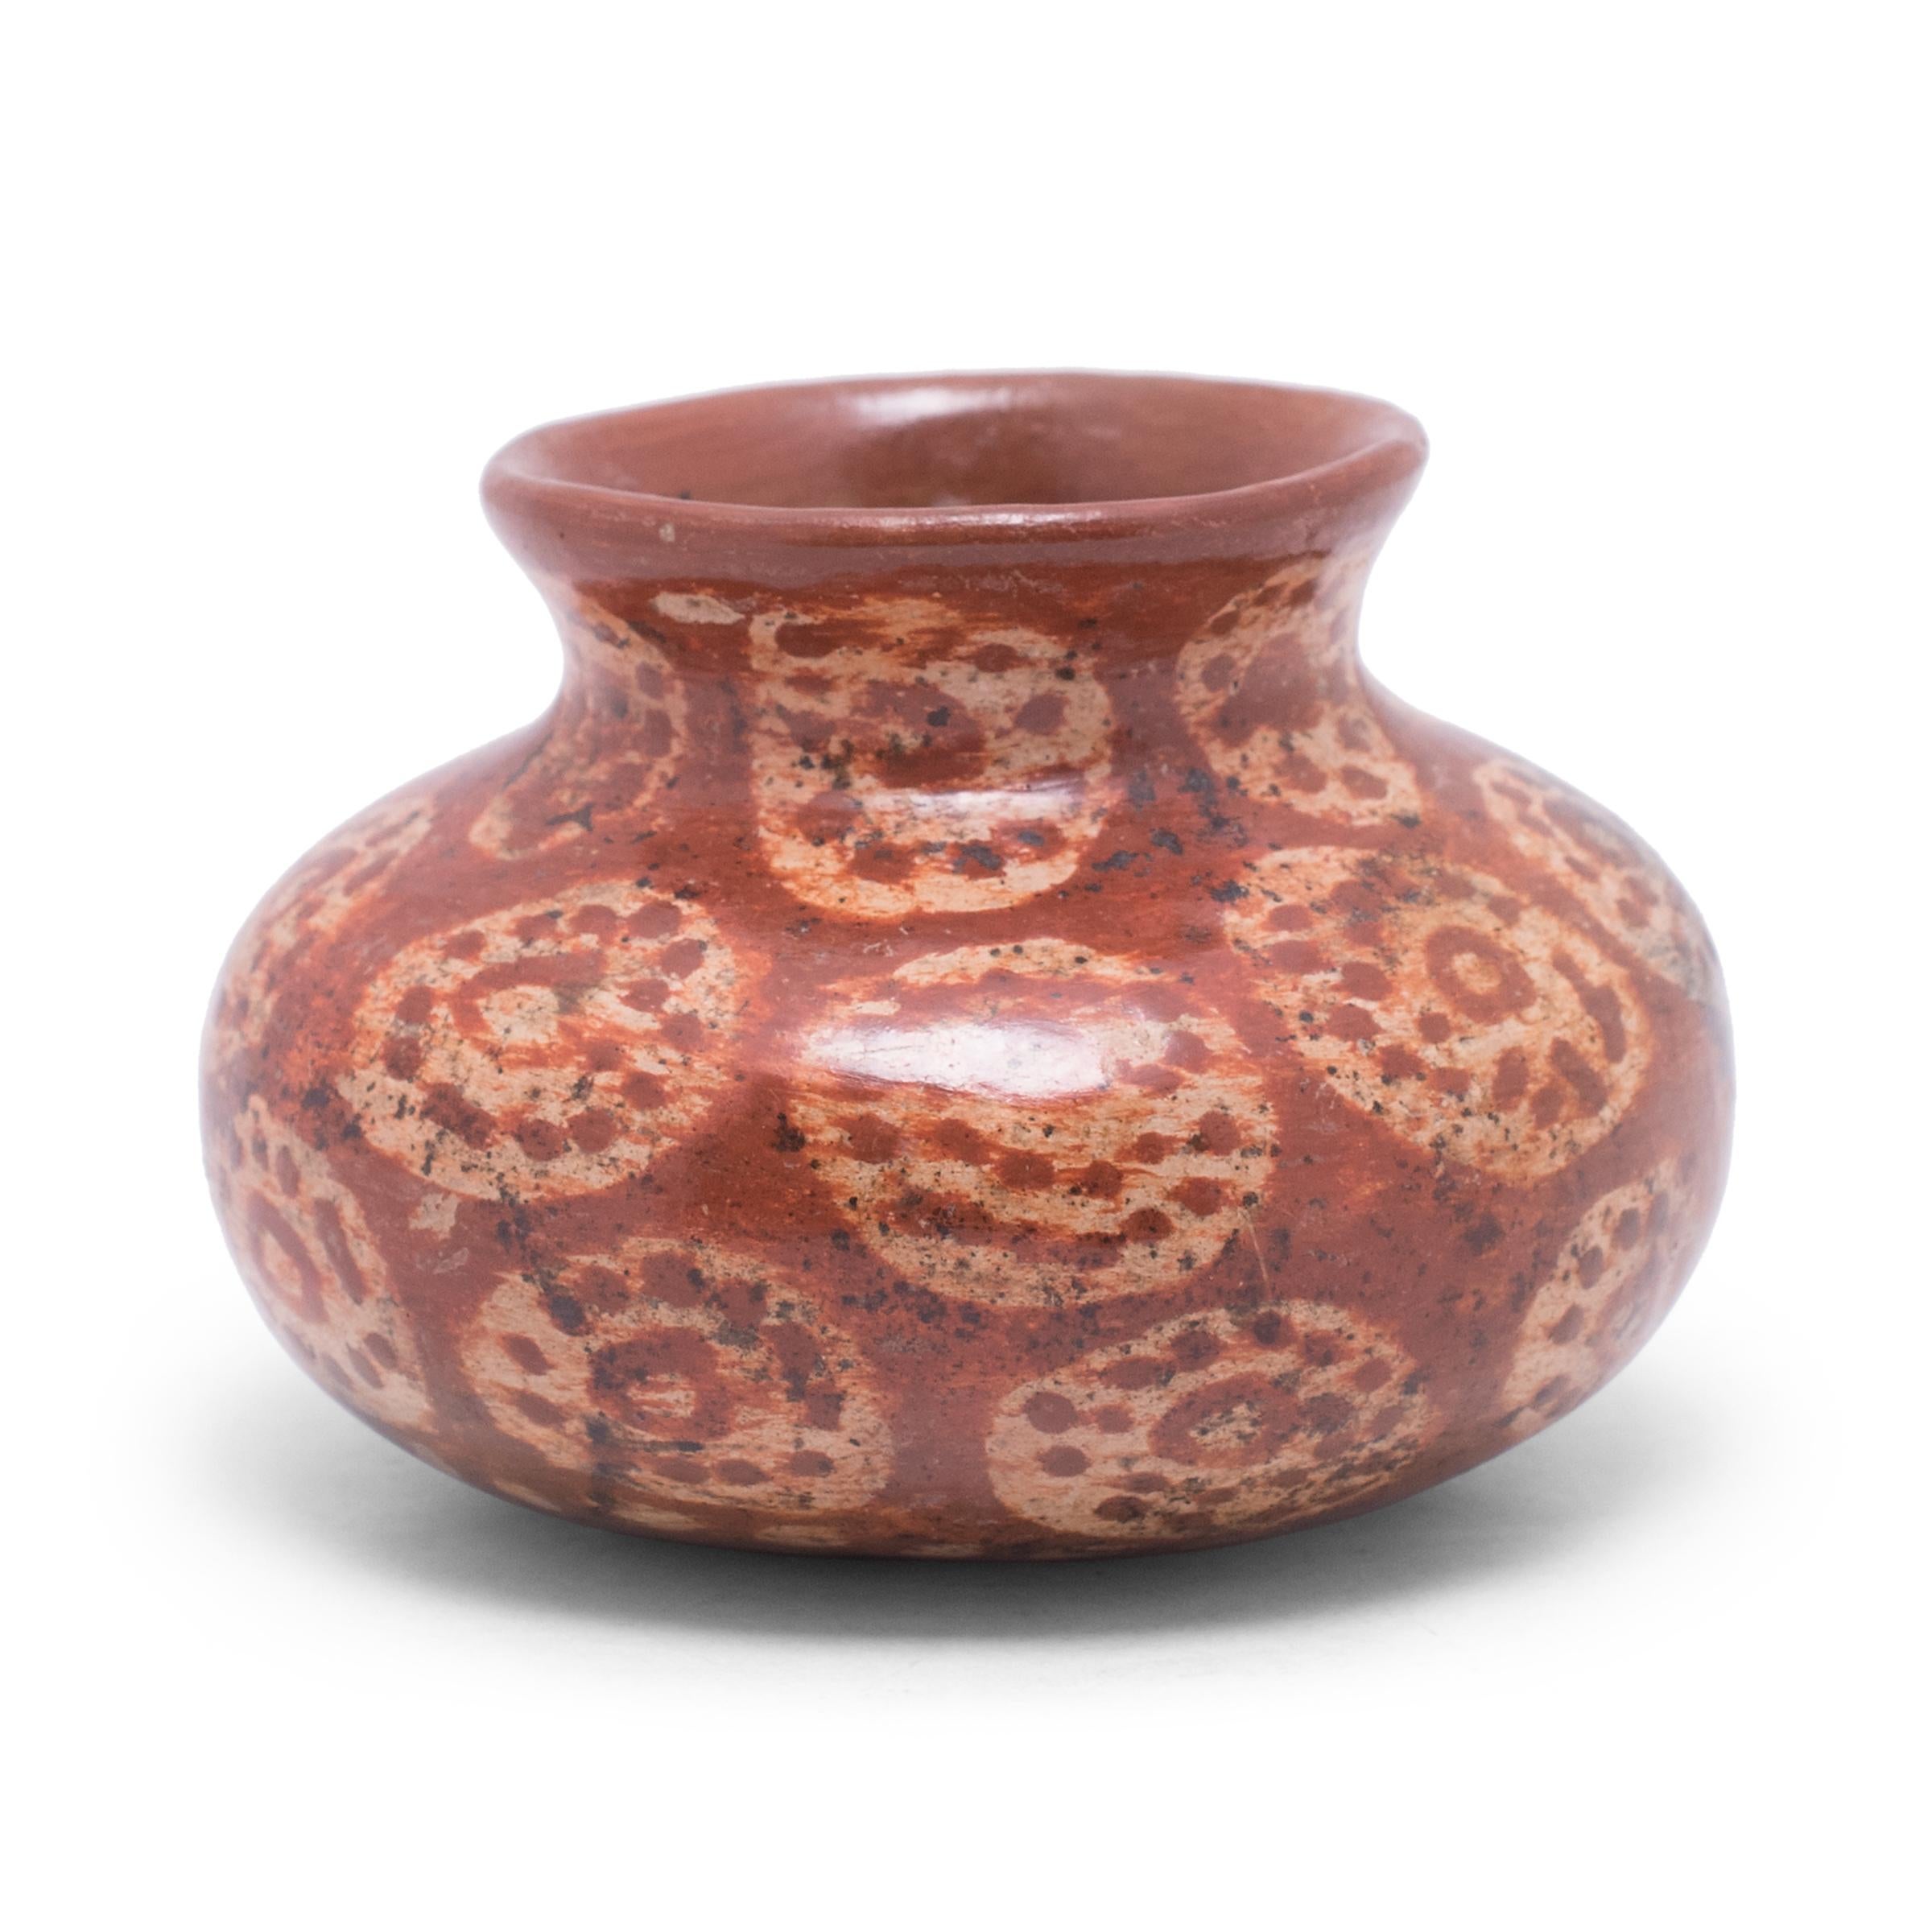 This little jar is a beautiful example of Mesoamerican pottery, decorated with red and white slip clay in the style of Chupícuaro ware. The olla vessel has a wide, globular body with a rounded base, constricted neck, and flared lip. The exterior is